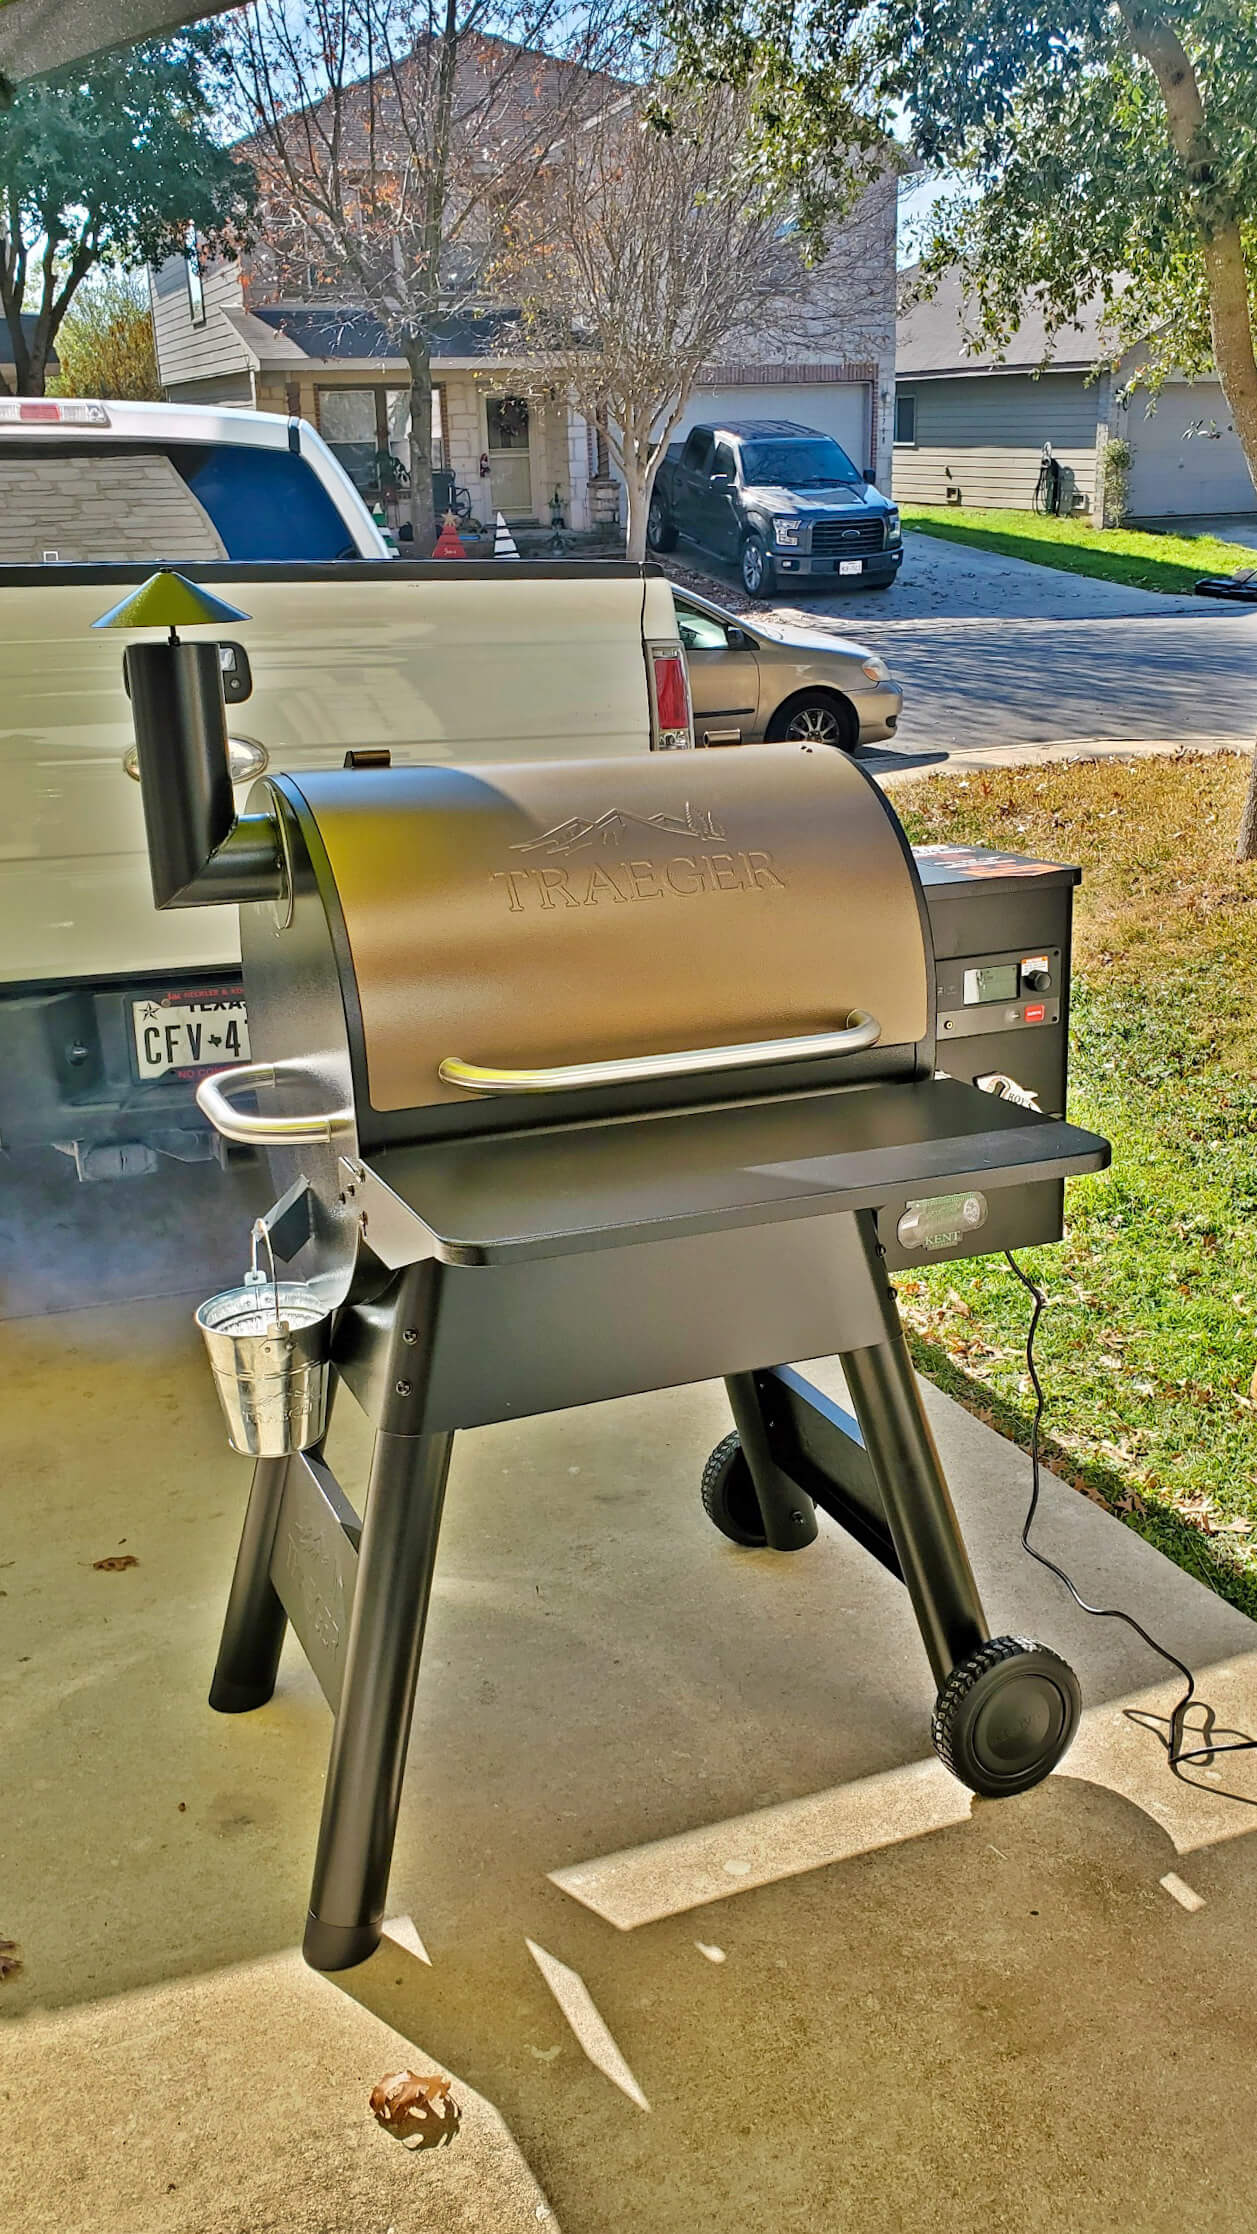 Chapa's first time pellet grilling on his driveway in San Antonio, Texas. (April 2020)